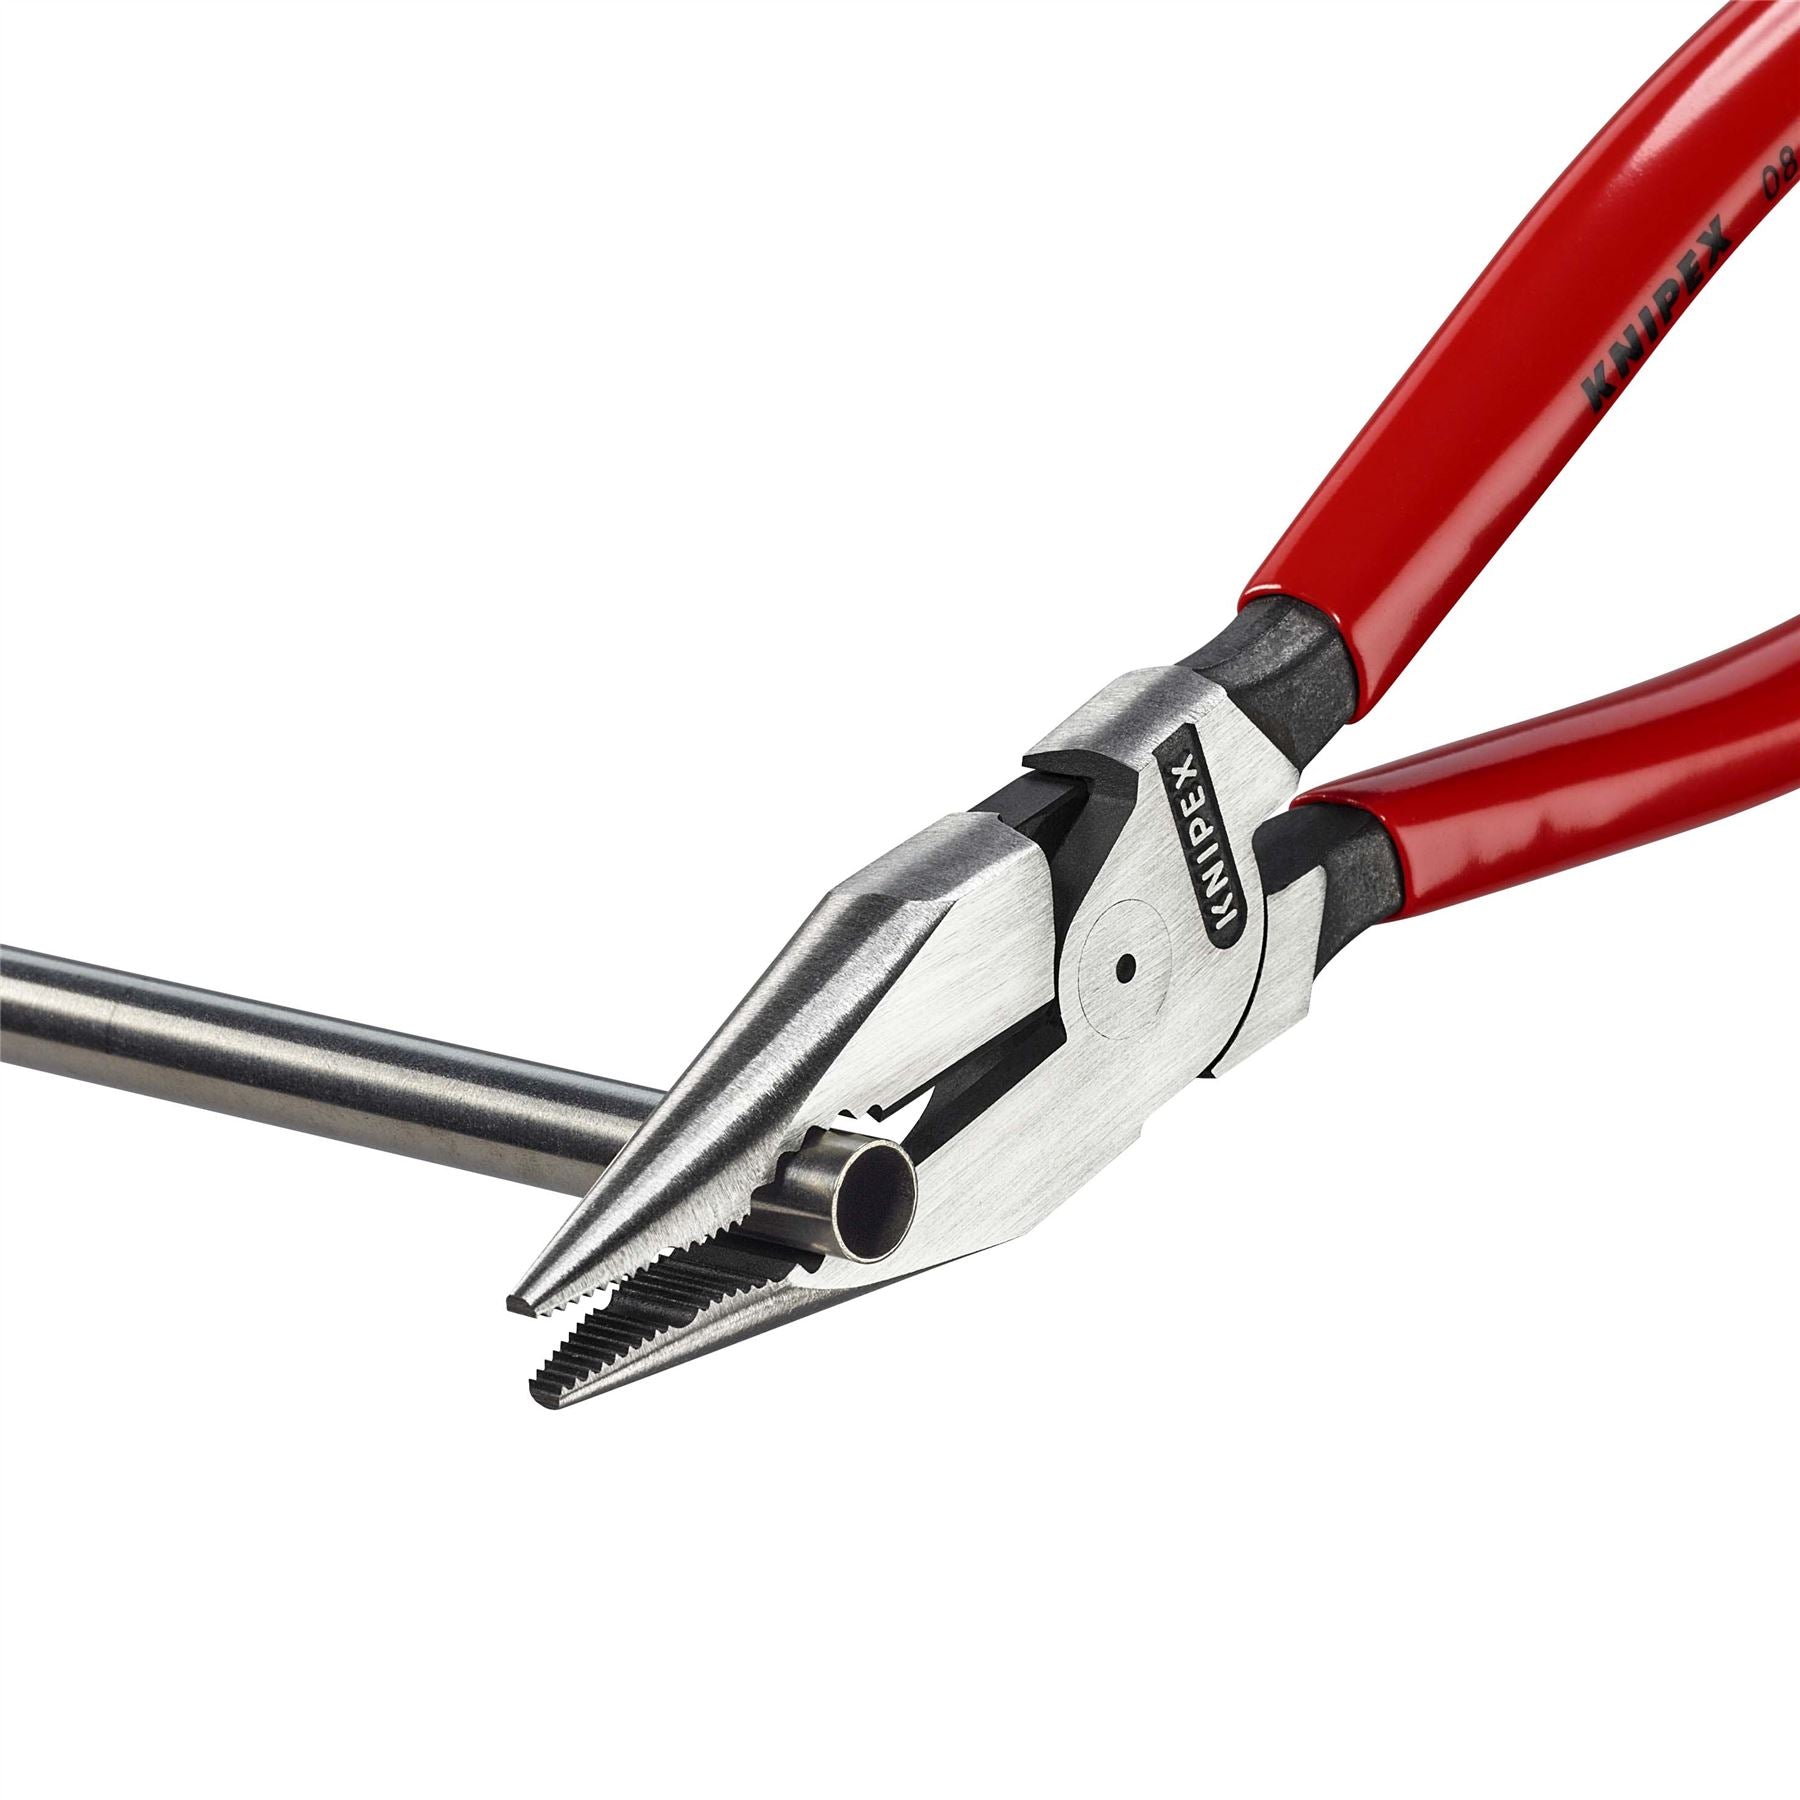 Knipex Needle Nose Combination Pliers 185mm 08 21 185